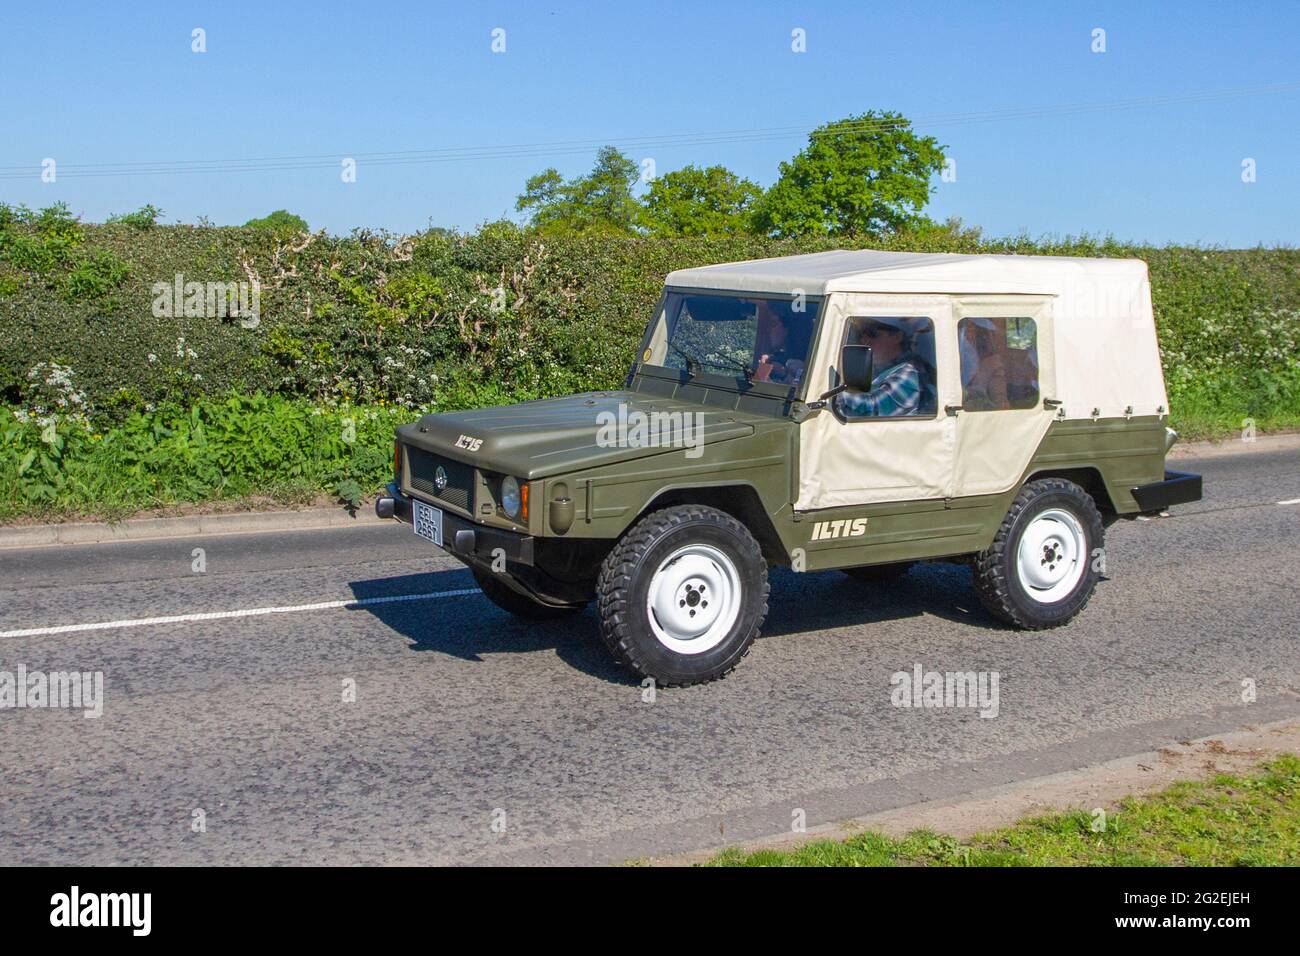 ILTIS 1979 70s 1970s seventies VW Volkswagen 1714cc petrol canvas covered open top SUV, Type 183, Iltis, German polecat, military vehicle. en-route to Capesthorne Hall classic May car show, Cheshire, UK Stock Photo